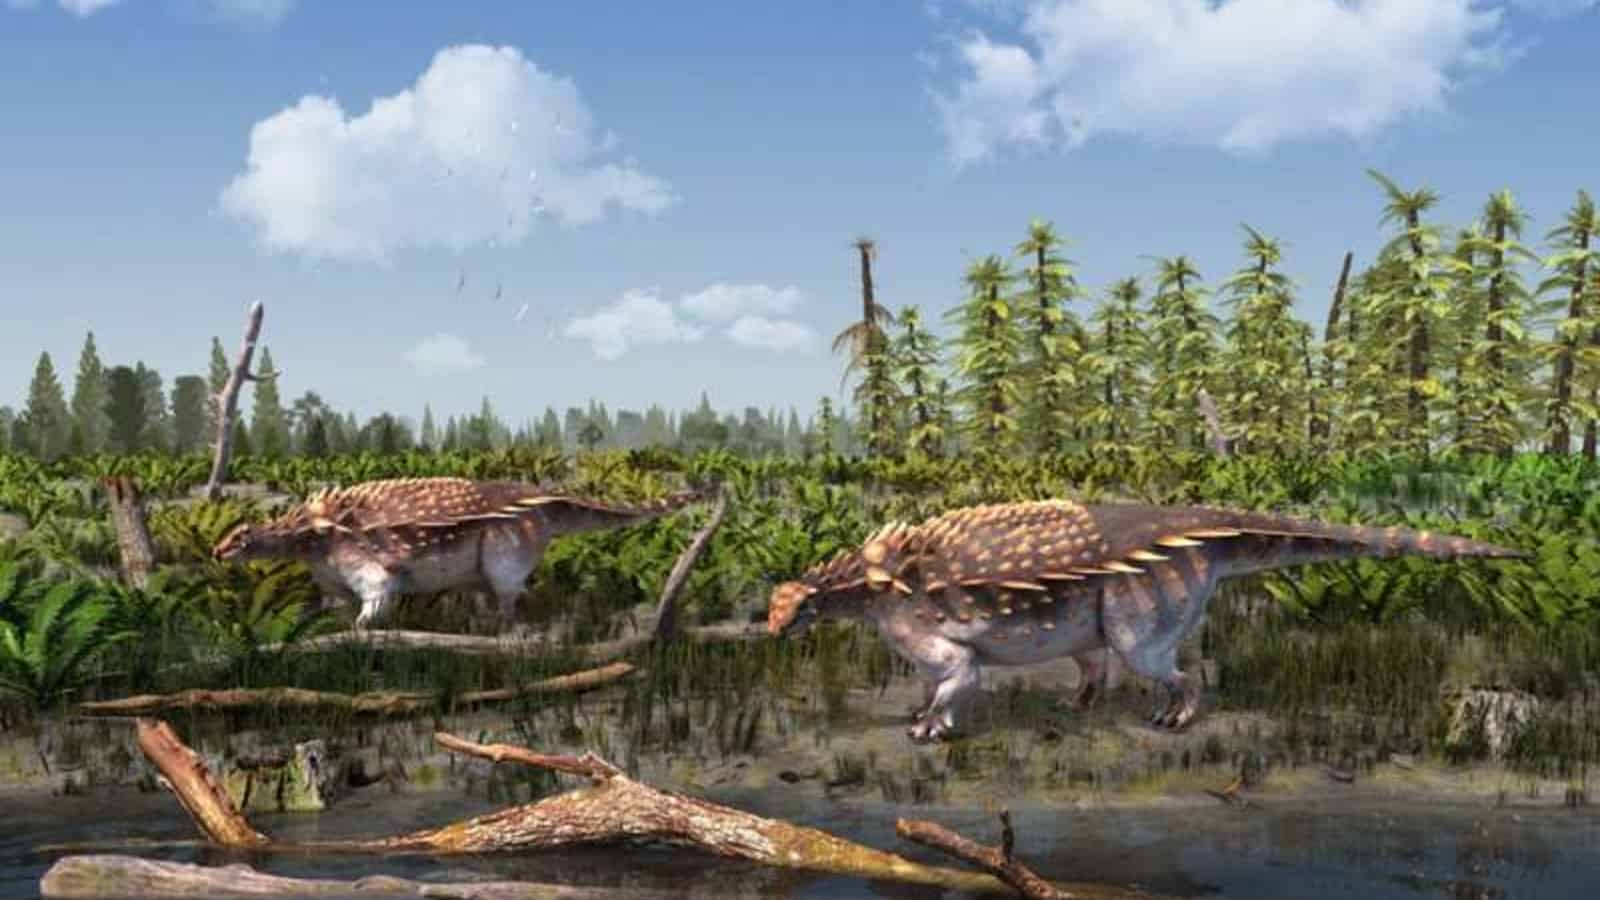 A dinosaur with side-blades discovered in England